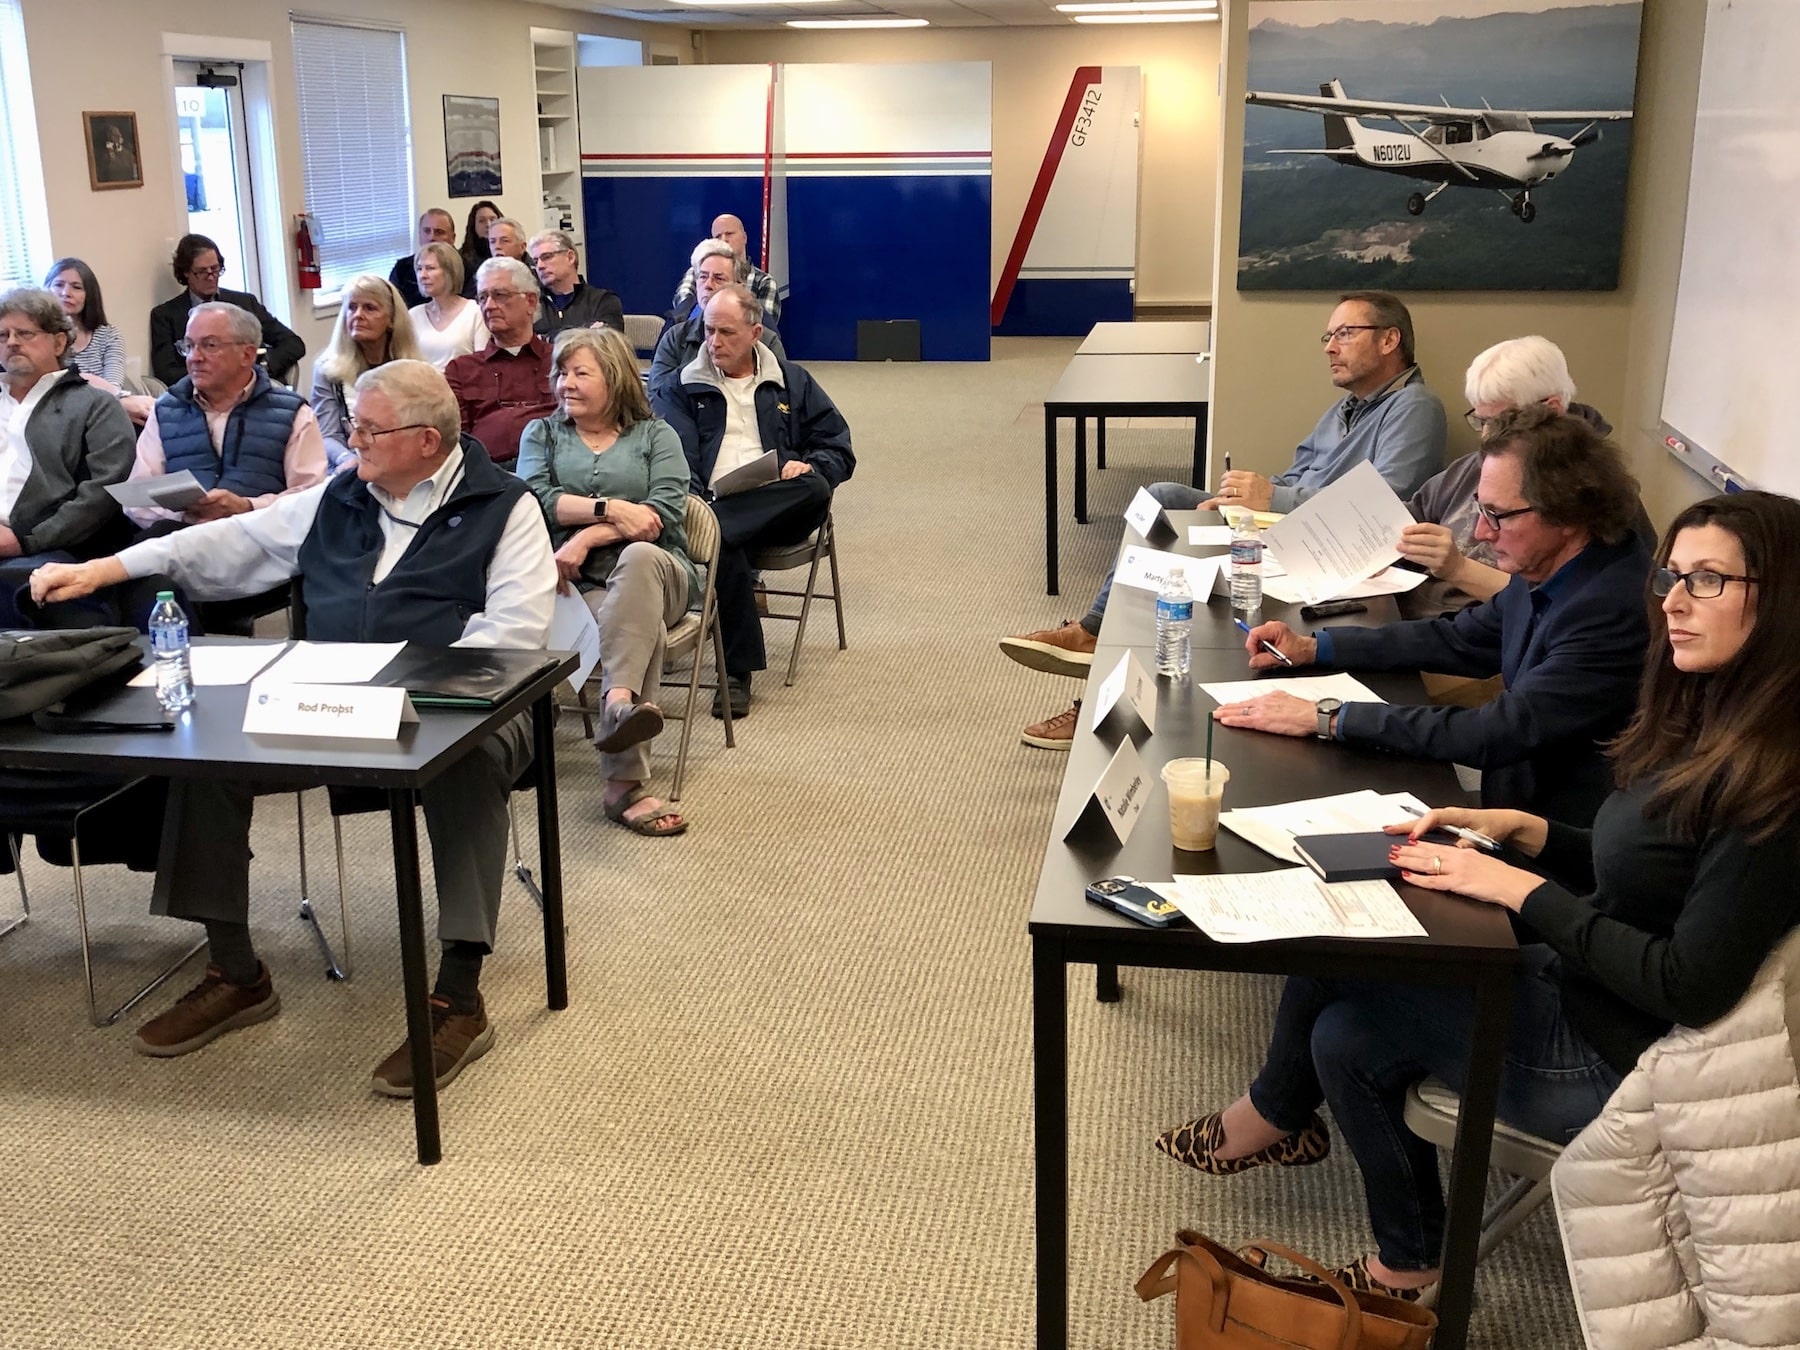 About 20 residents attended the airport advisory committee meeting Tuesday night.